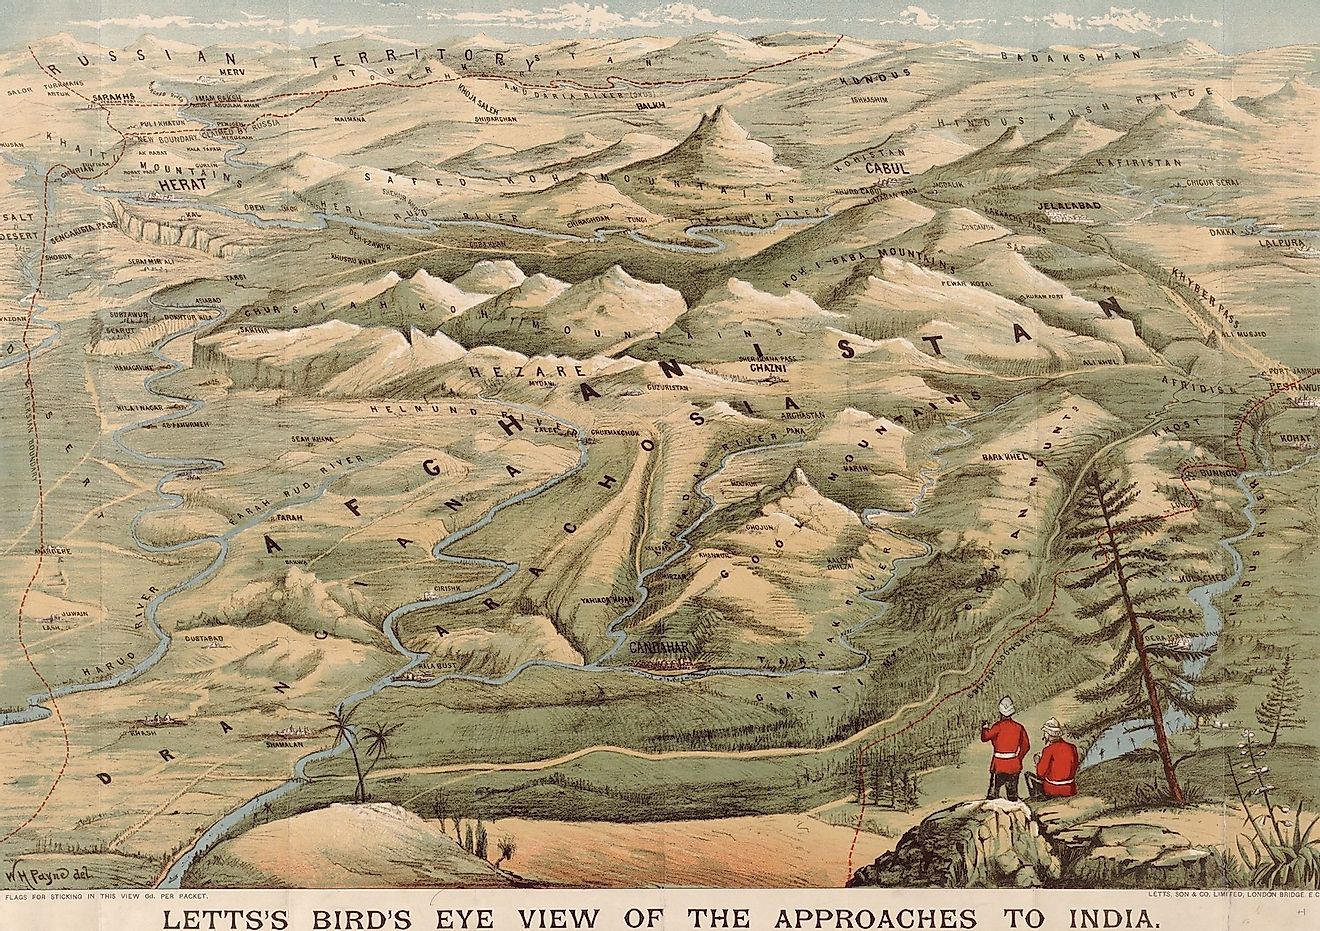 Early 20th century British map shows red coated soldiers looking into the Indus Valley and Afghanistan from Indian territory. Image credit: Everett Collection/Shutterstock.com